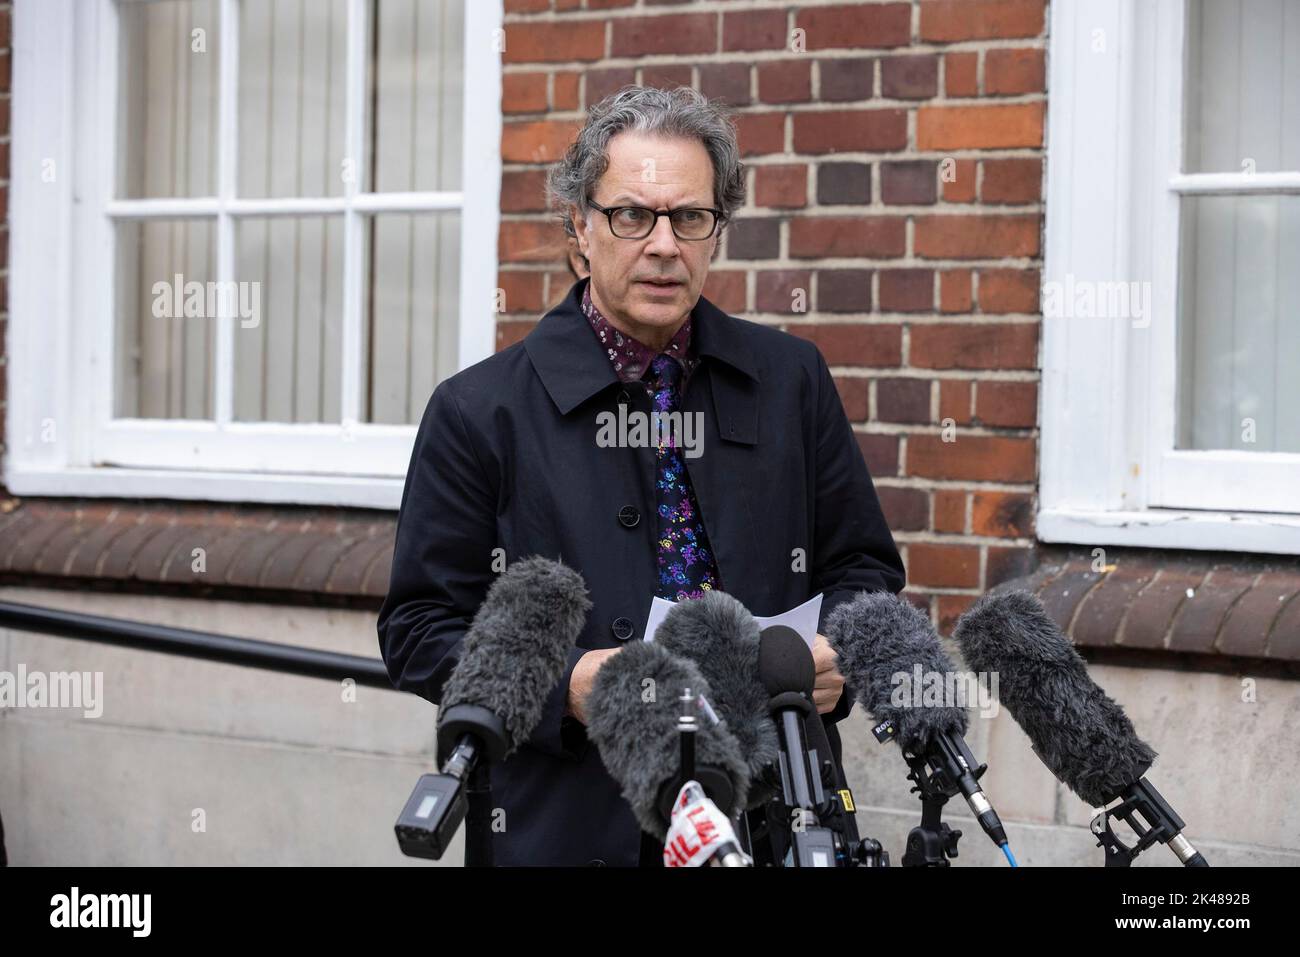 London, UK. 30th Sep, 2022. PHOTO:JEFF GILBERT 30th September 2022 Barnet, North London, UK Ian Russell (Molly's father), gives a statement after the final day of the Molly Russell inquest at North London CoronoerÕs Court. Credit: Jeff Gilbert/Alamy Live News Stock Photo